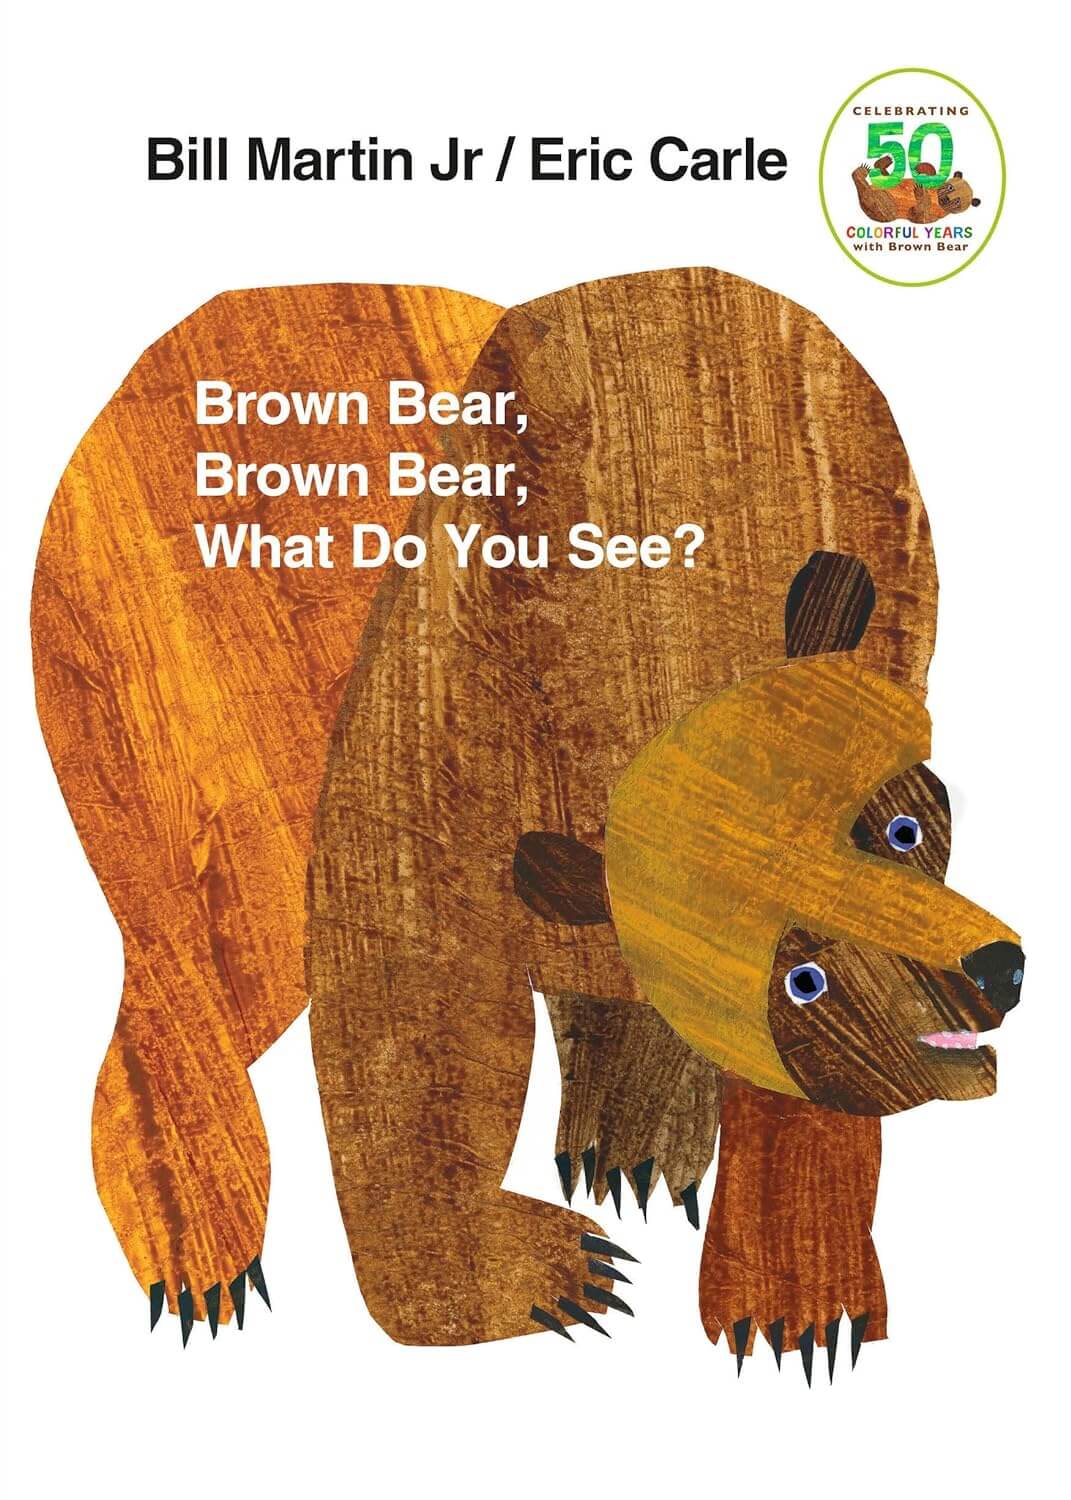 "Brown Bear, Brown Bear, What Do You See?" by Bill Martin & Eric Carle